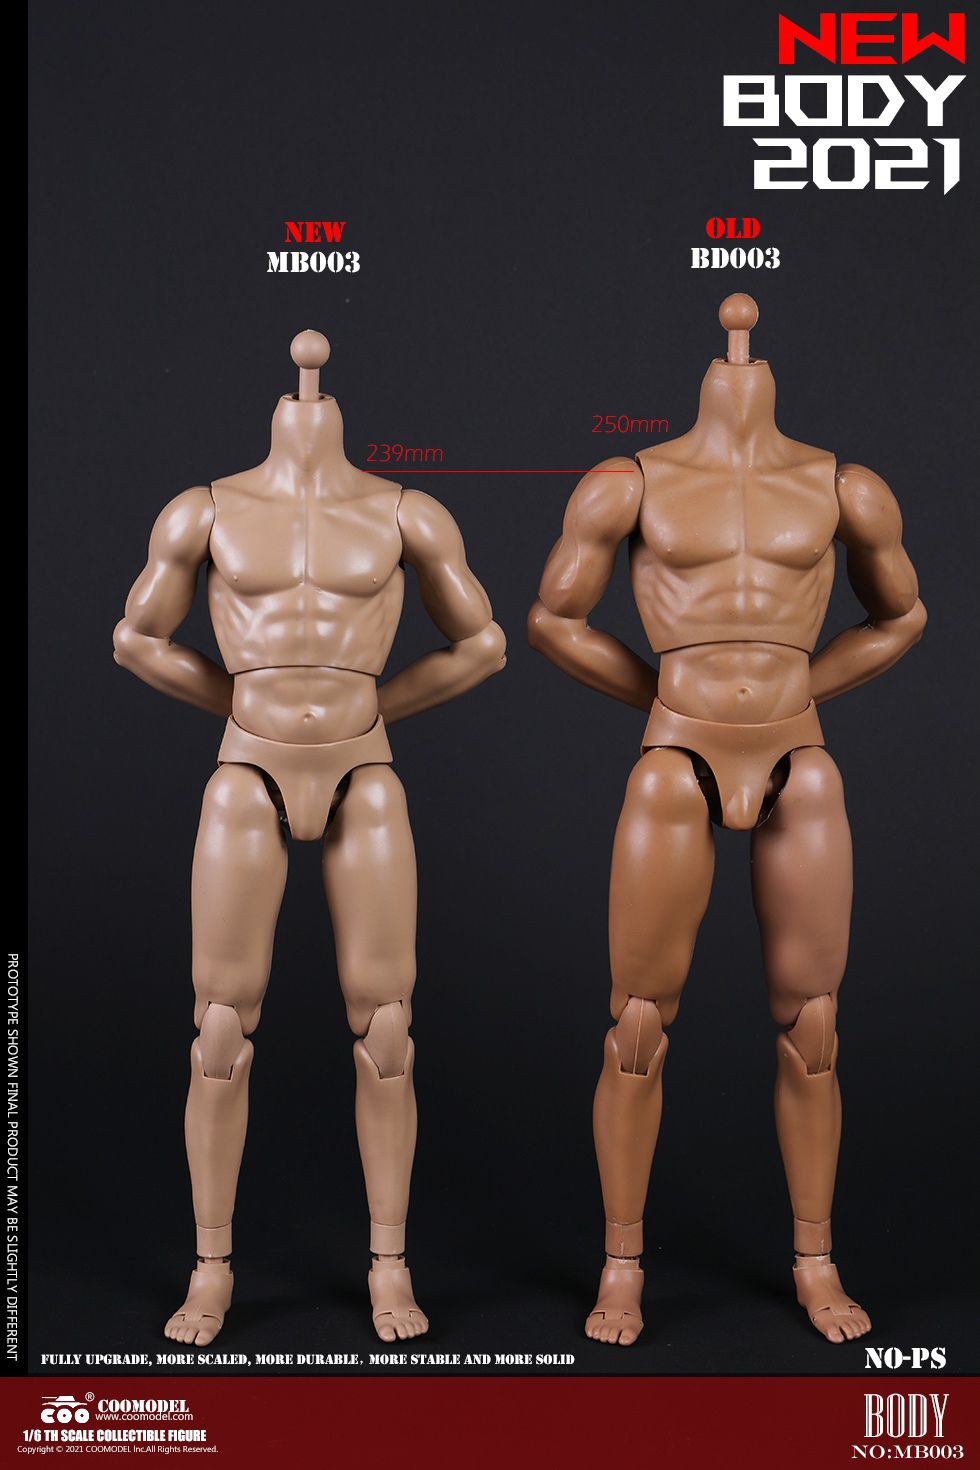 Coomodel - NEW PRODUCT: COOMODEL: 1/6 MB001 standard male body, MB002 tall male body, MB003 muscle male body, MB004 tall muscle body 18100310